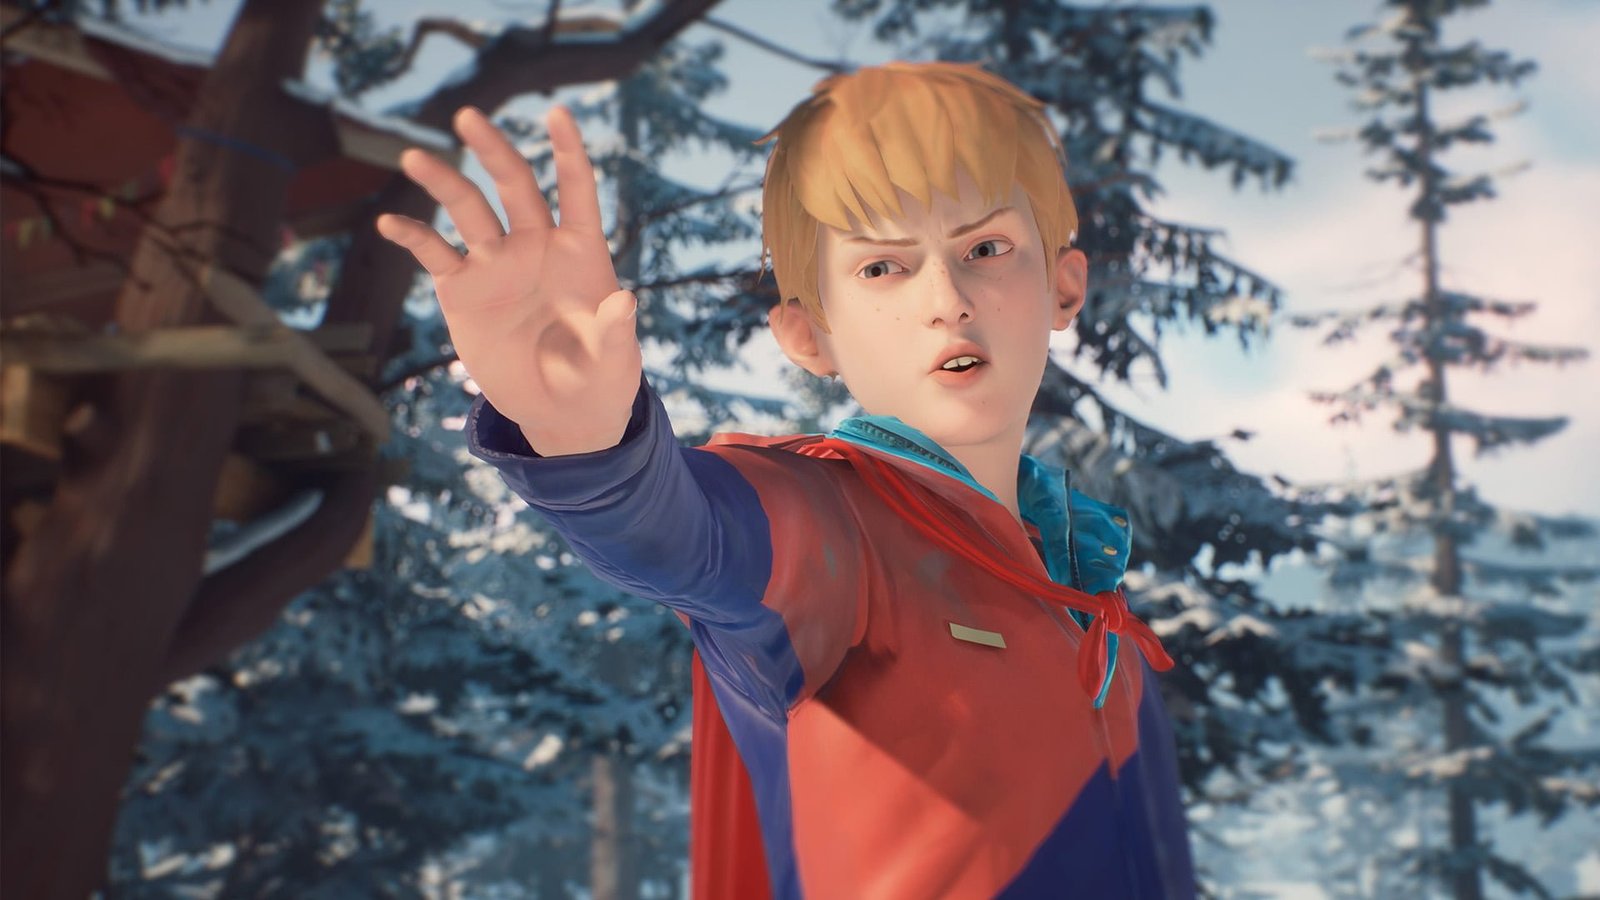 Review – The Awesome Adventures of Captain Spirit